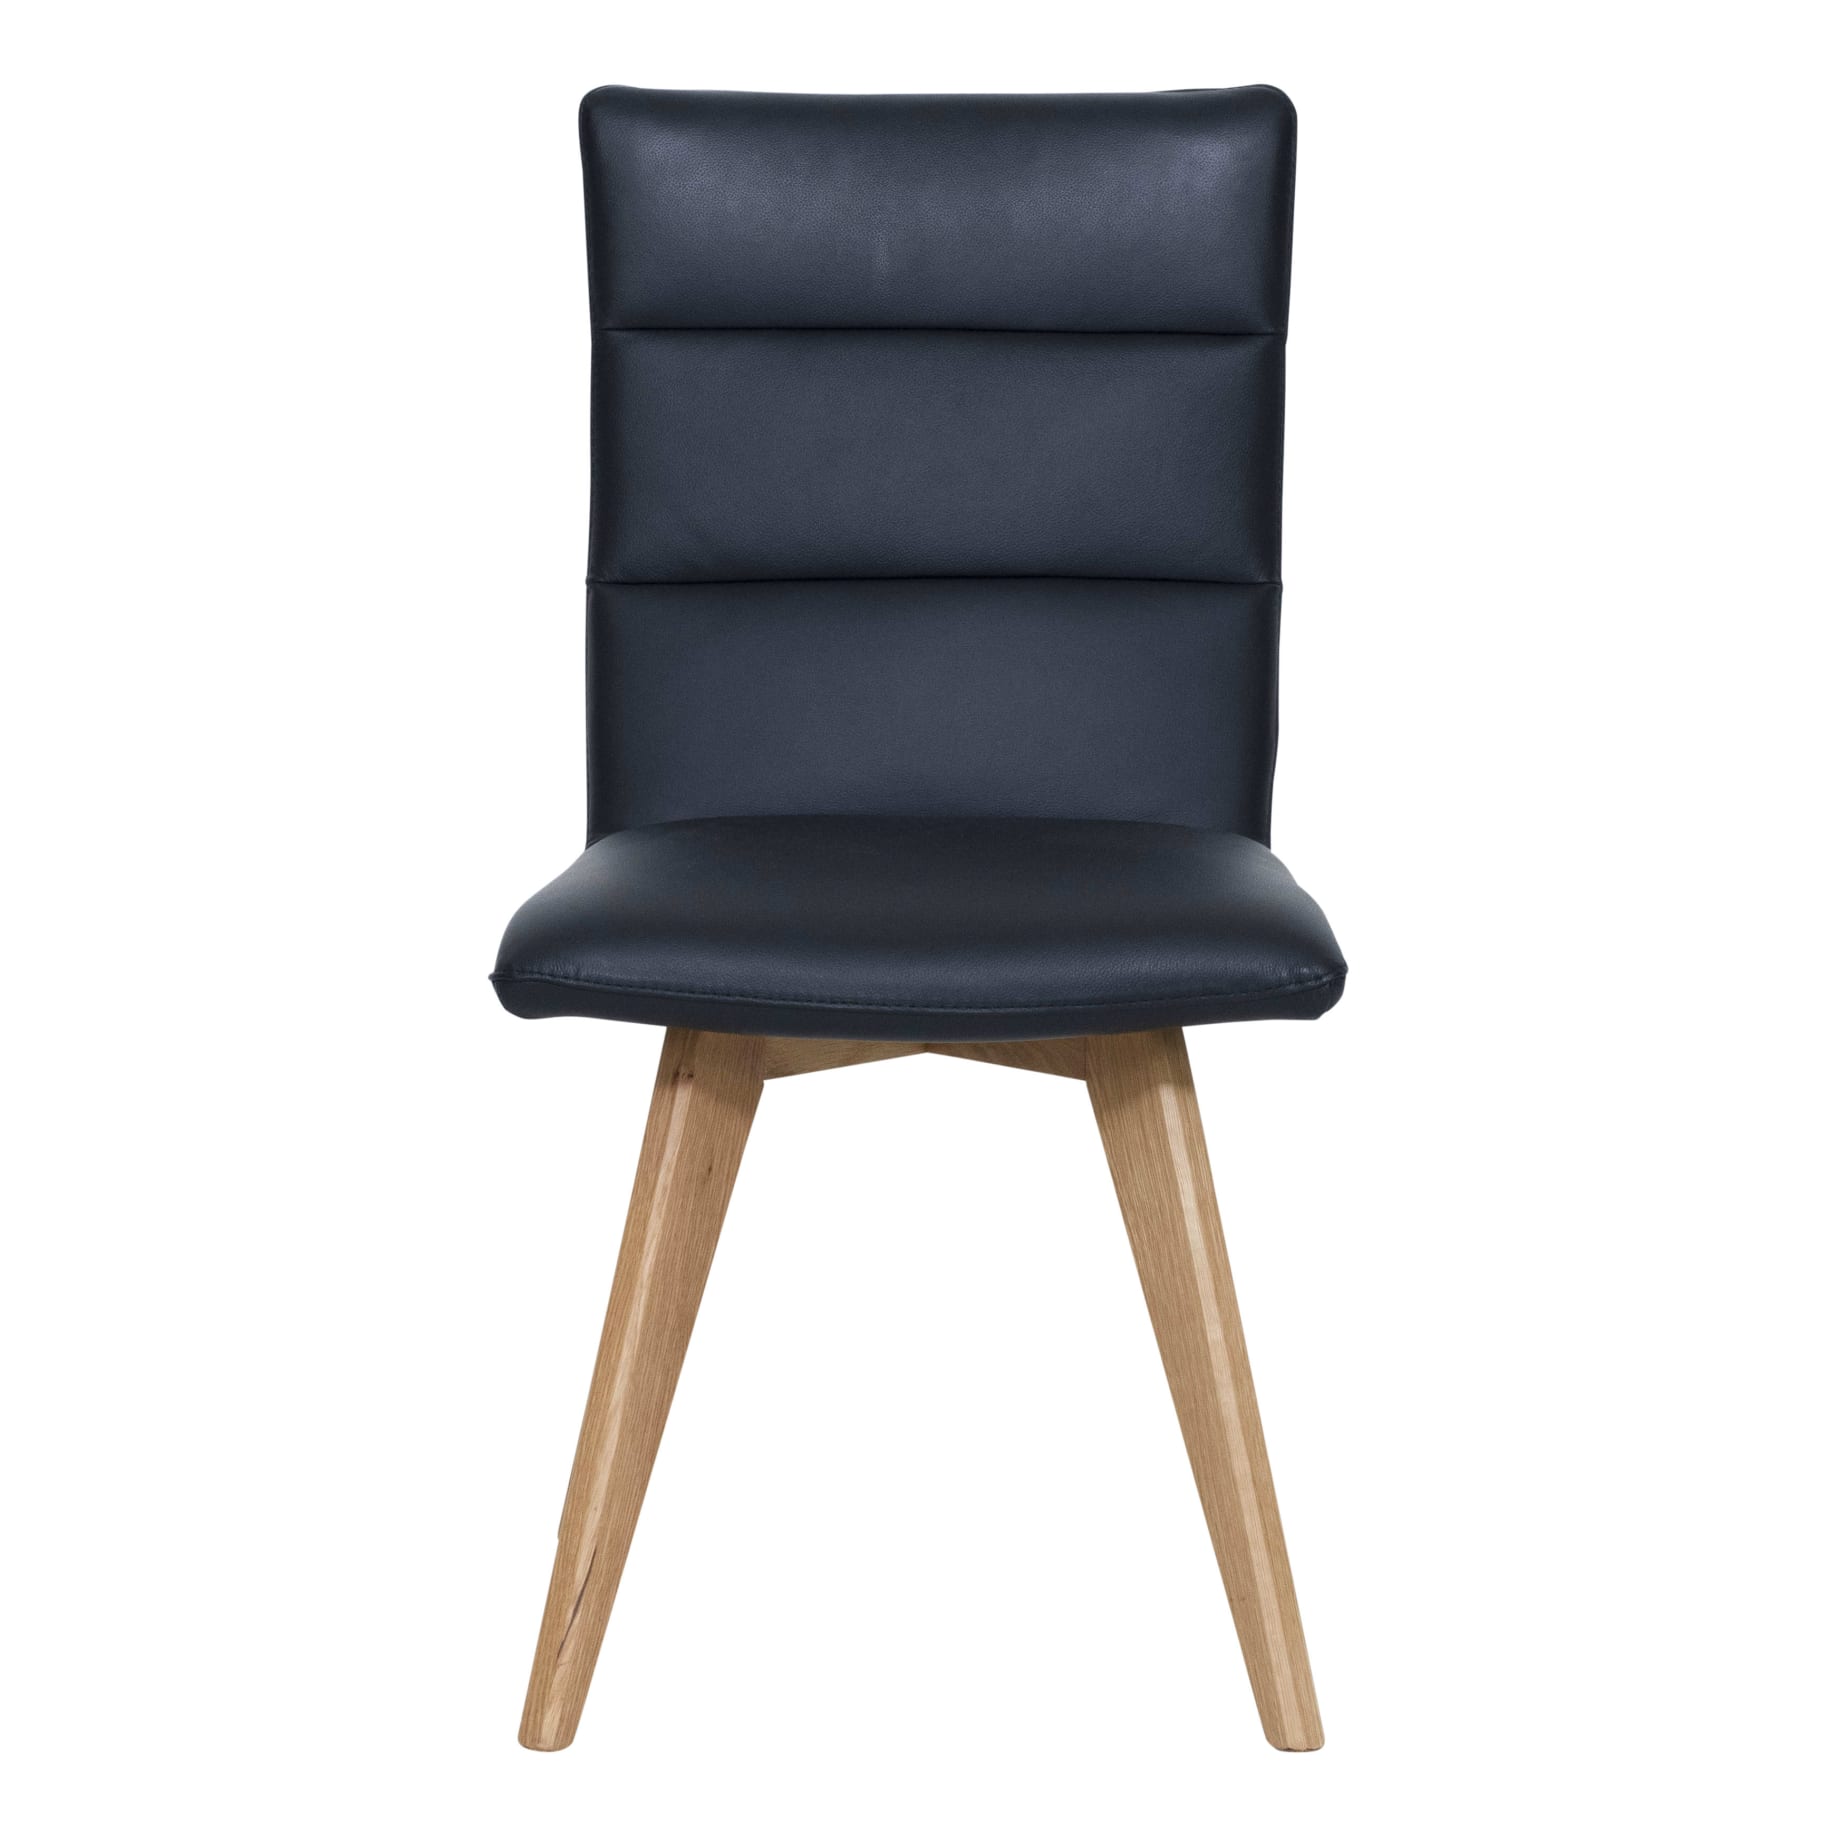 Hudson Dining Chair in Black Leather/Oak Stain